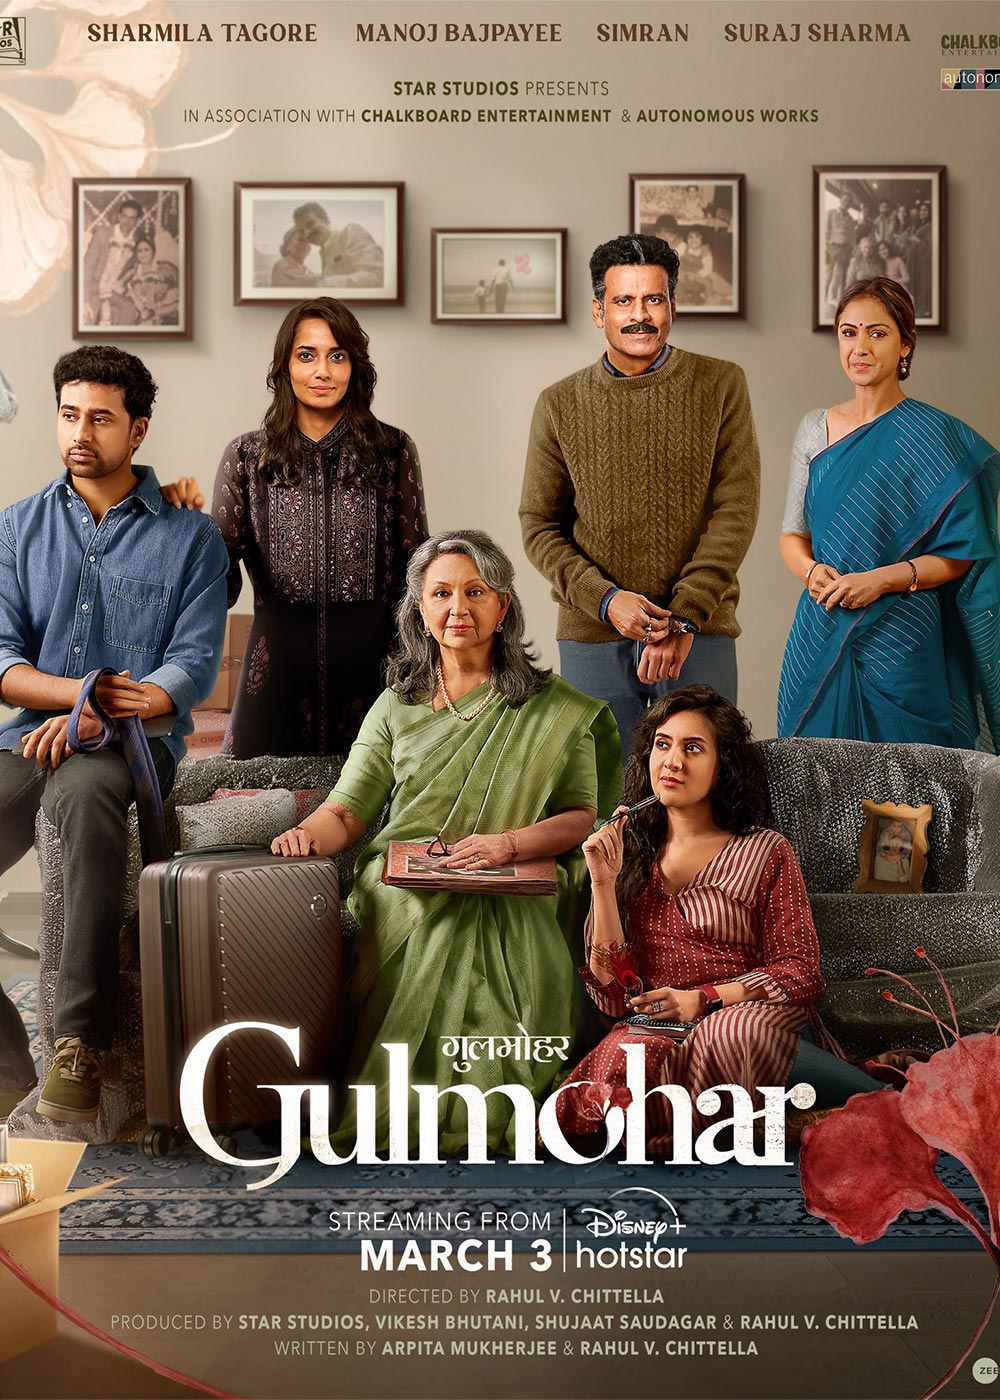 Watch Gulmohar Full movie Online In HD | Find where to watch it online on  Justdial Germany